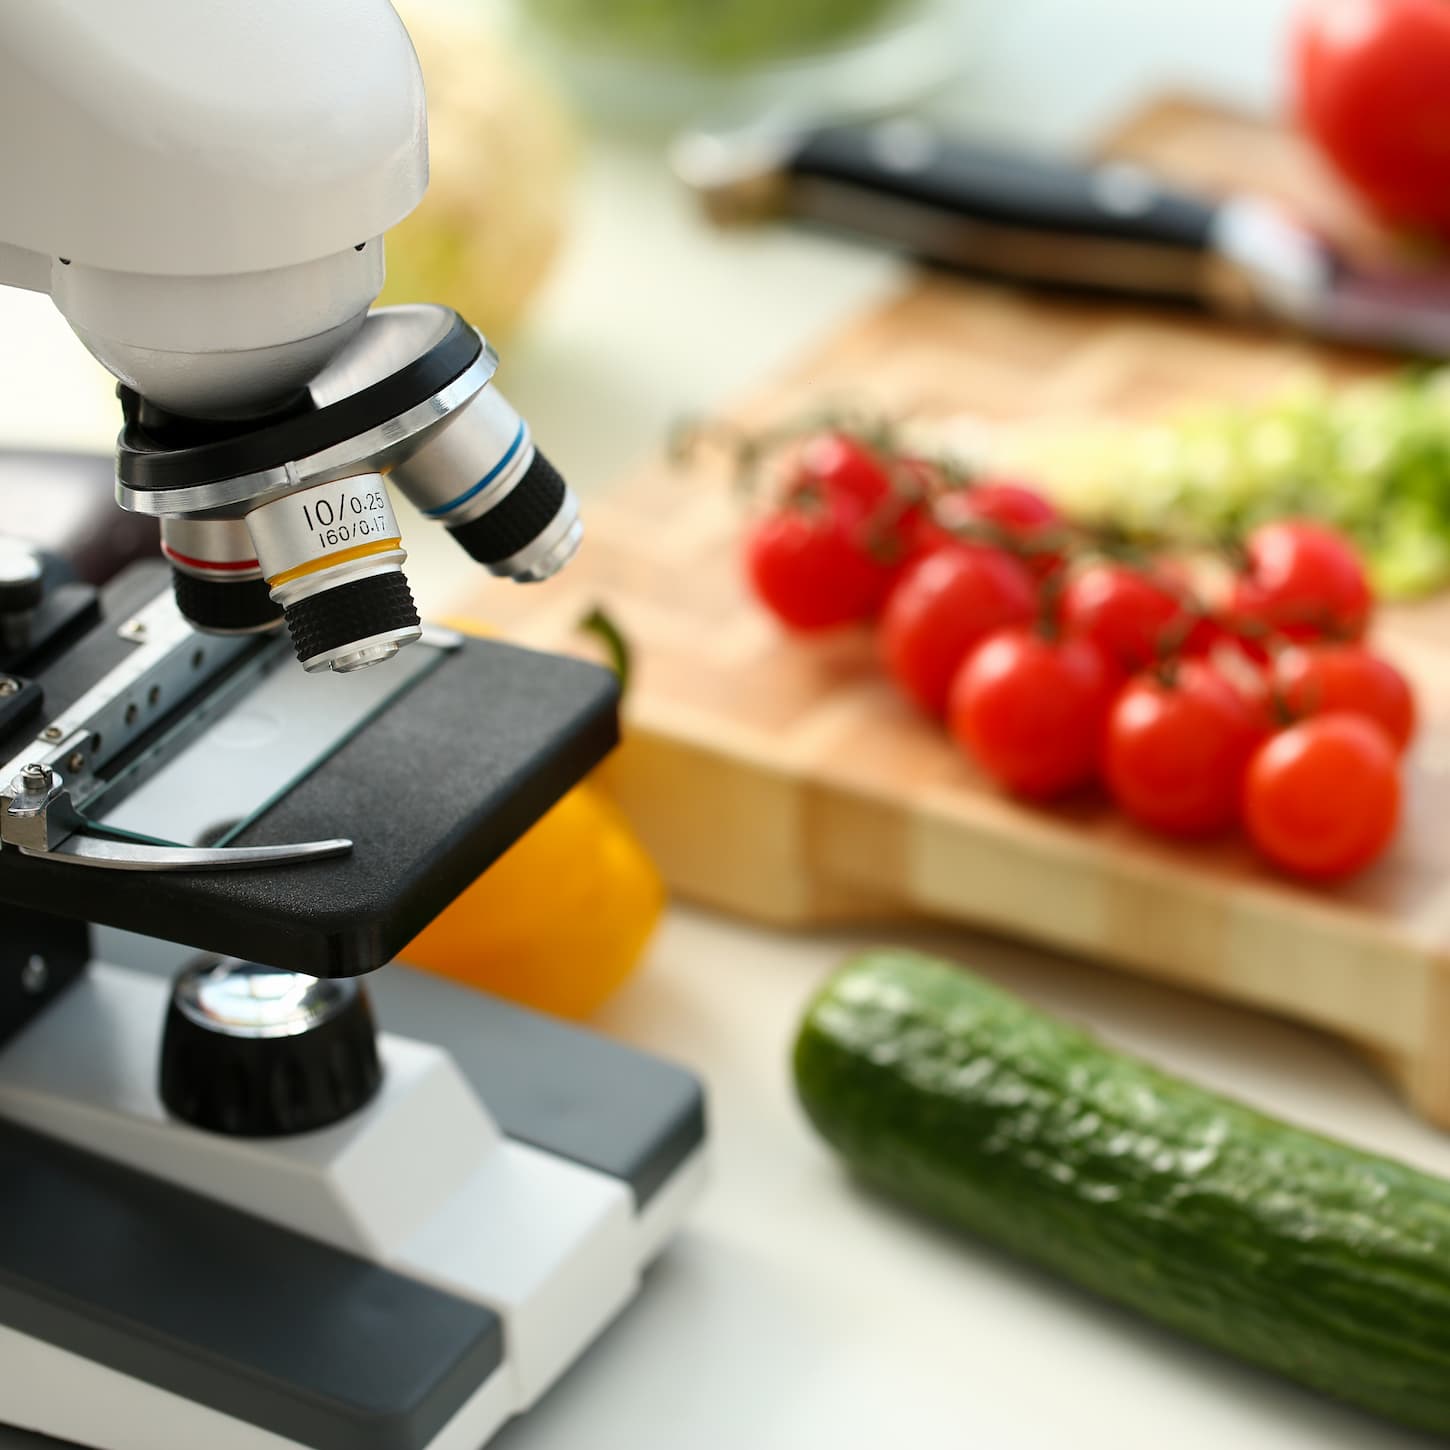 microscope-head-kitchen-background-vegetables-concept-nitrates